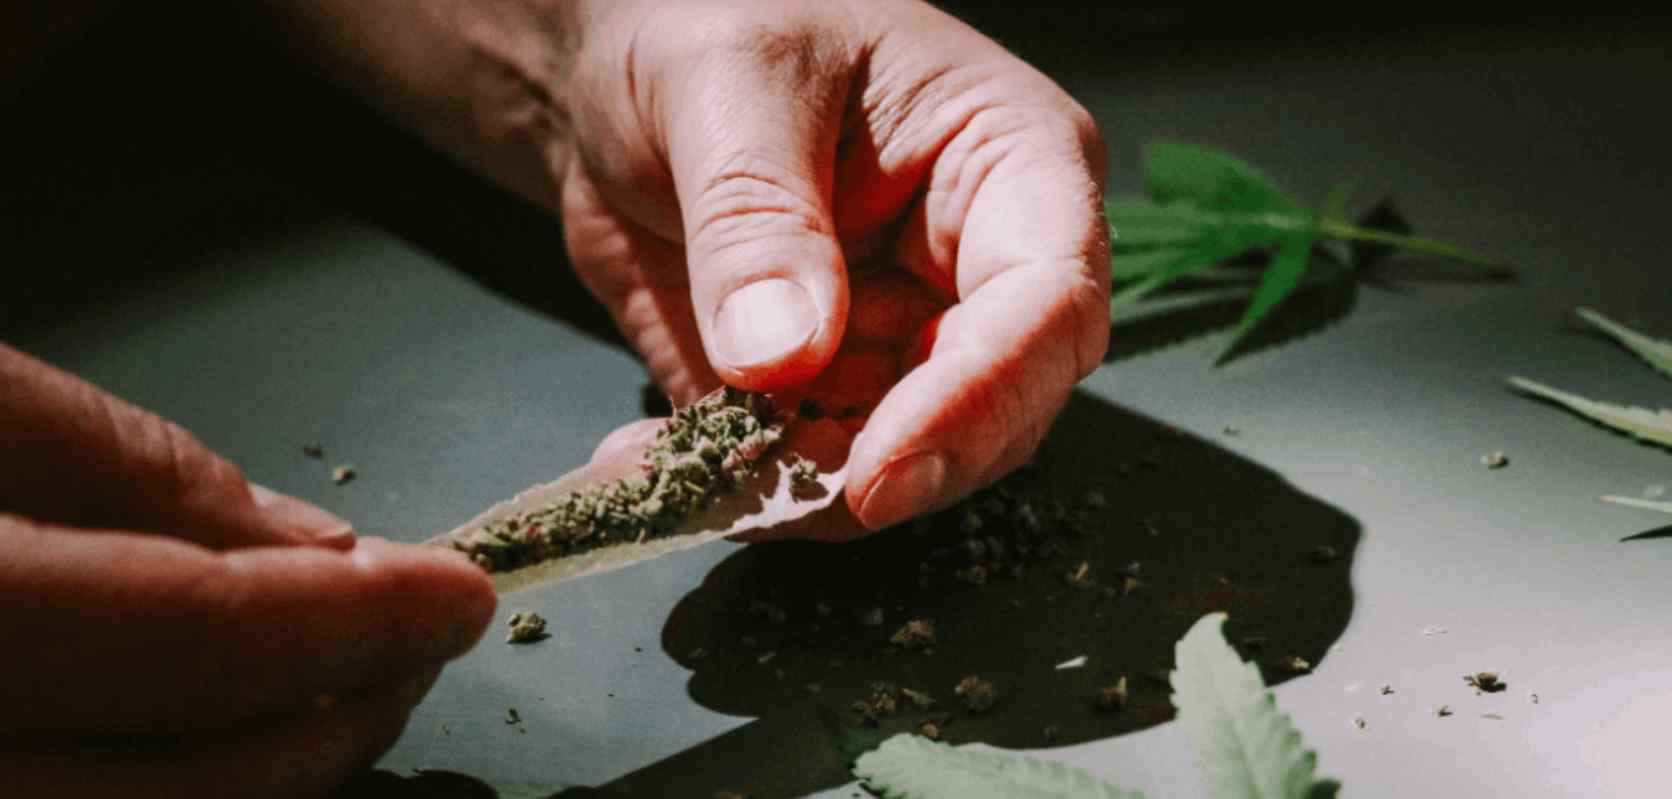 Once you are done grinding your herb, proceed to roll a large joint. Note that this is typically bigger than a regular joint in terms of length and thickness. 